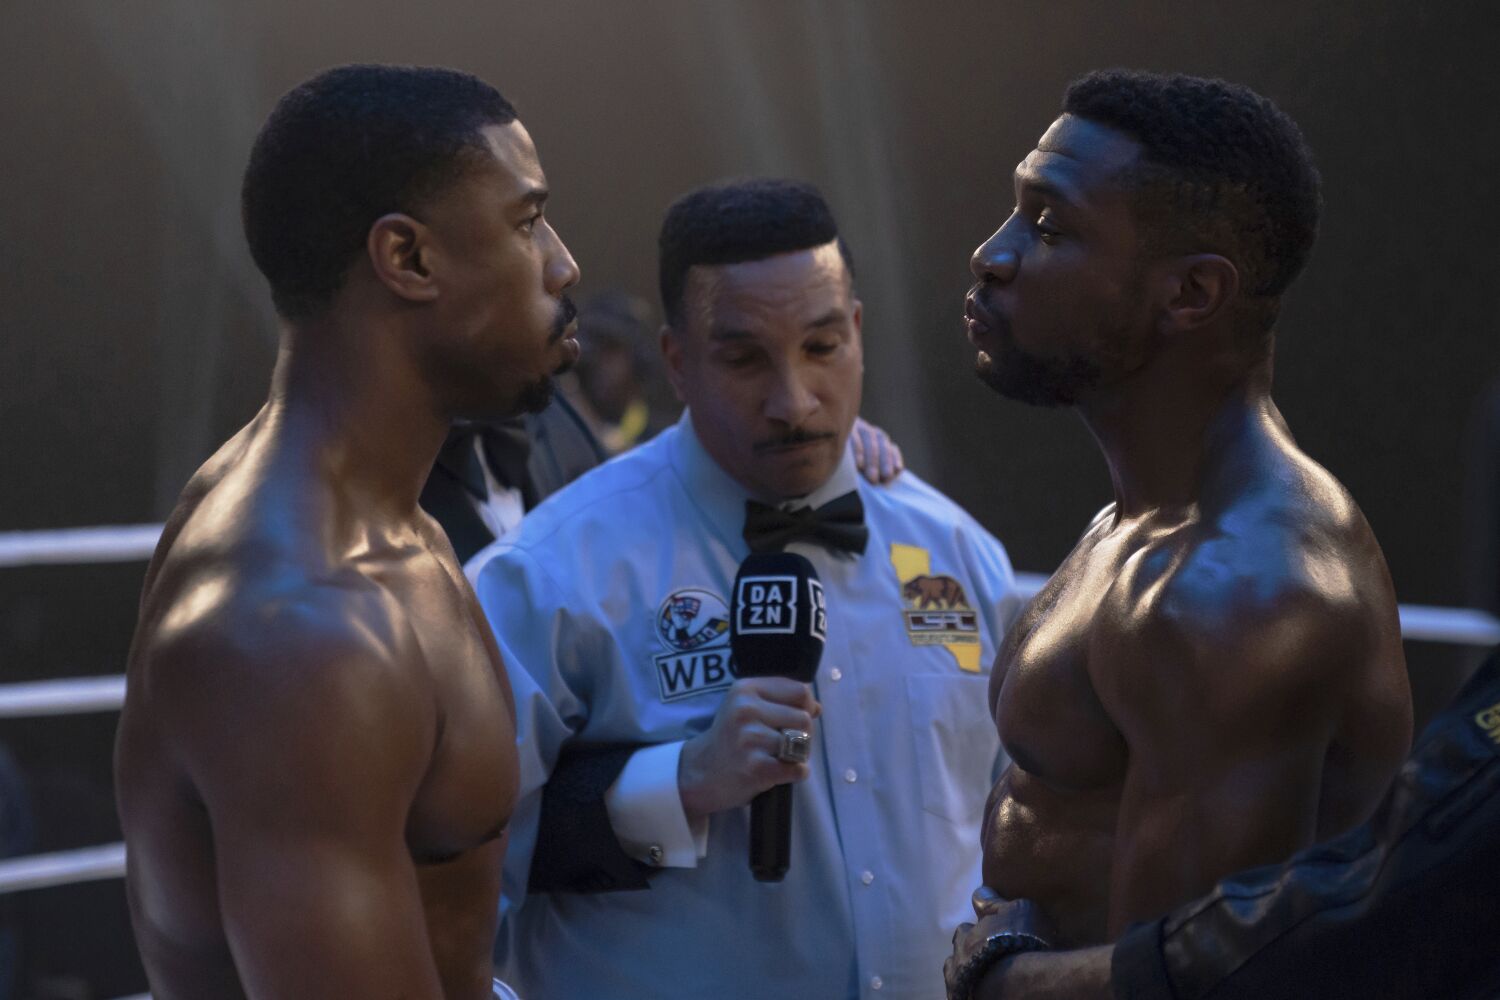 Review: Michael B. Jordan is the one to fly now with 'Creed III'